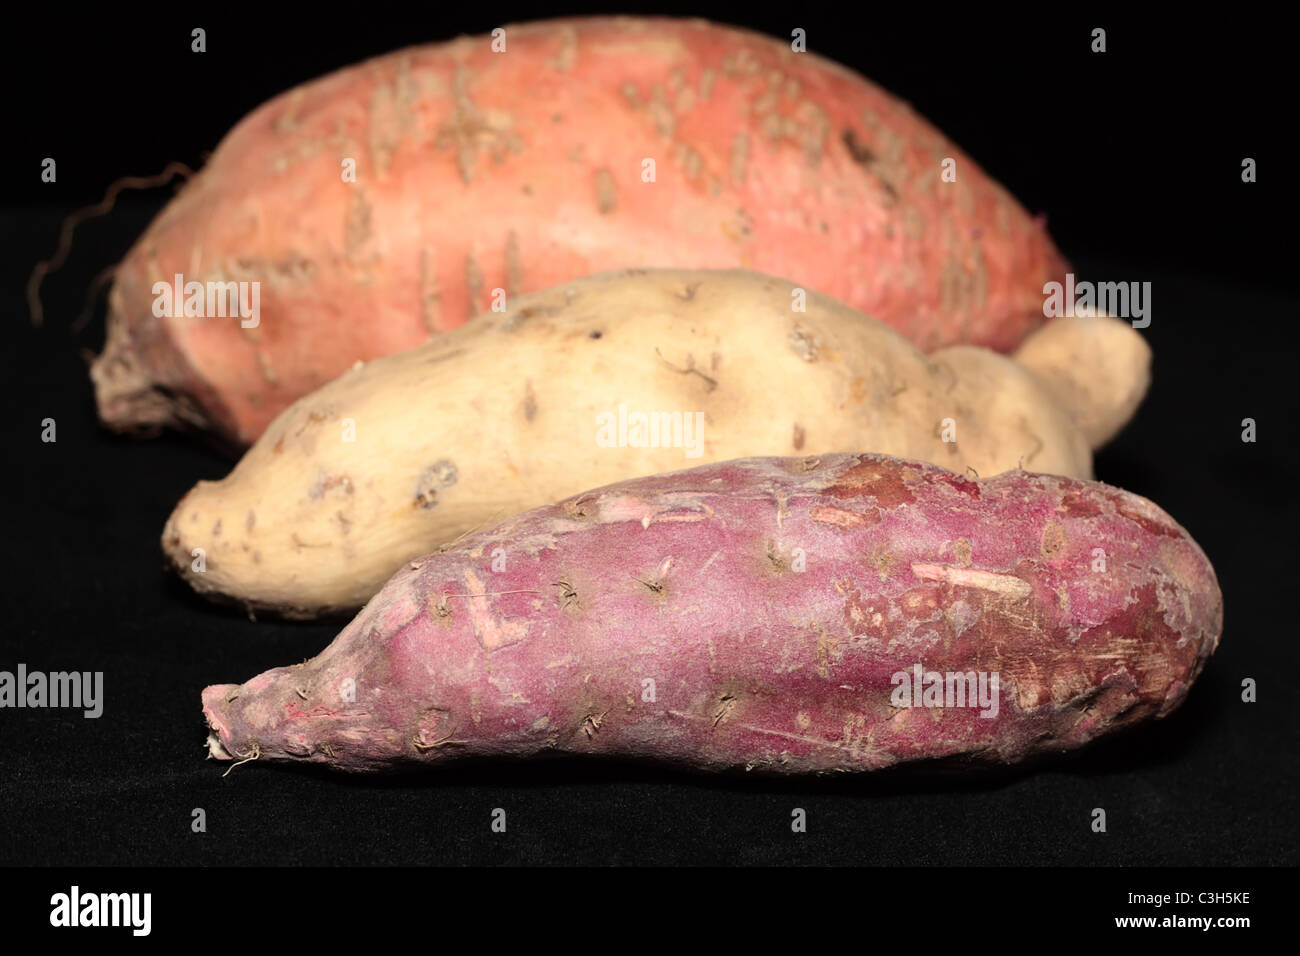 Closeup of Three Kinds of Sweet Potatoes on Black Background Stock Photo